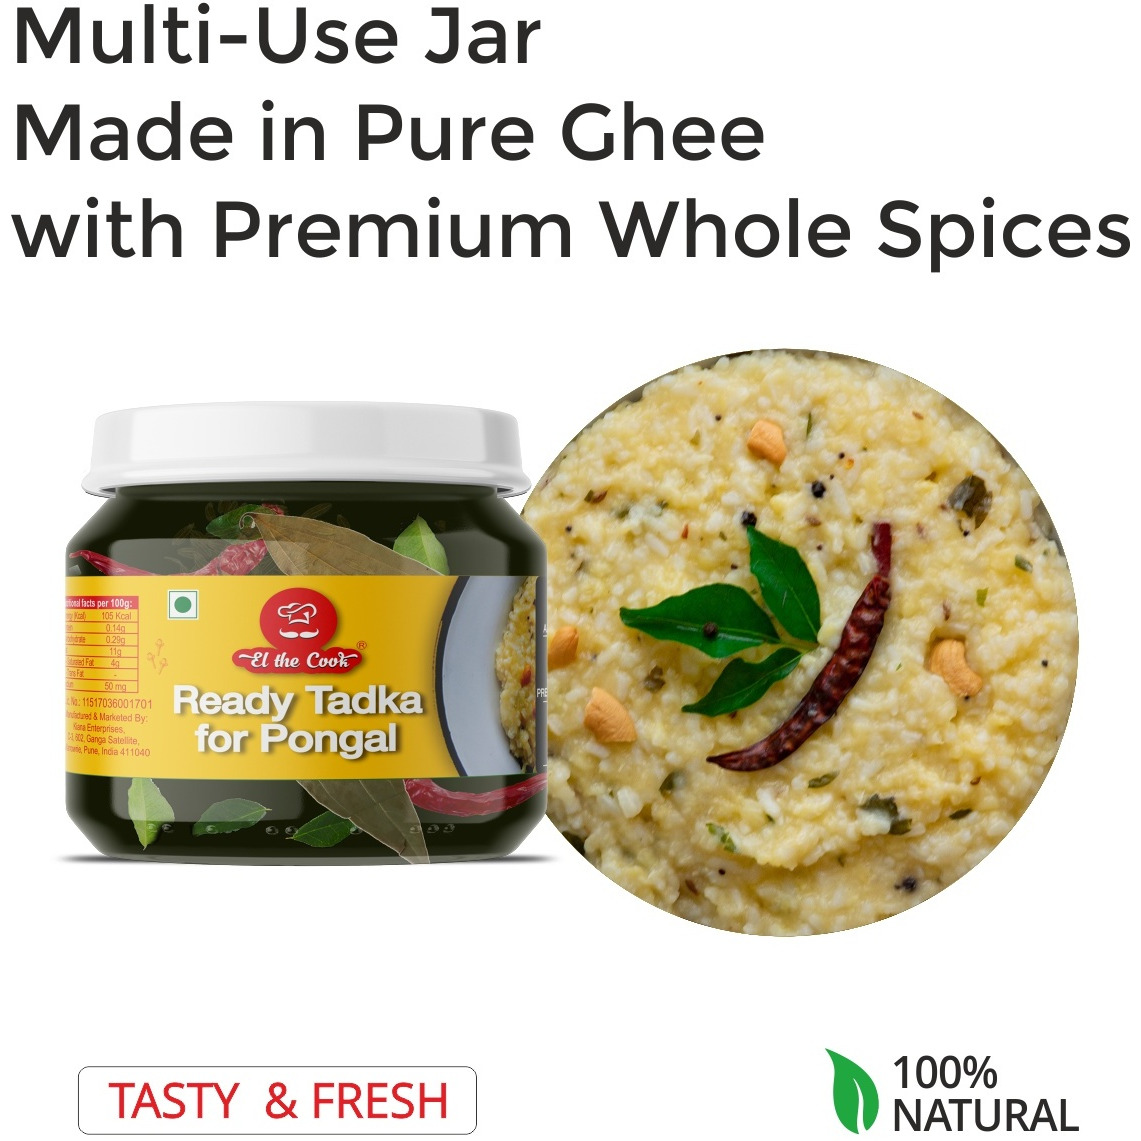 EL The Cook Ready-to-Use Ghee Tadka(CONCENRATED Whole Spice Tempering) for Pongal (South Indian Kitchari), Indian Lentils Seasoning, Super Saver Jar Pack, 6.34oz, Vegetarian, Gluten-Free (Flavor: South Indian Pongal)